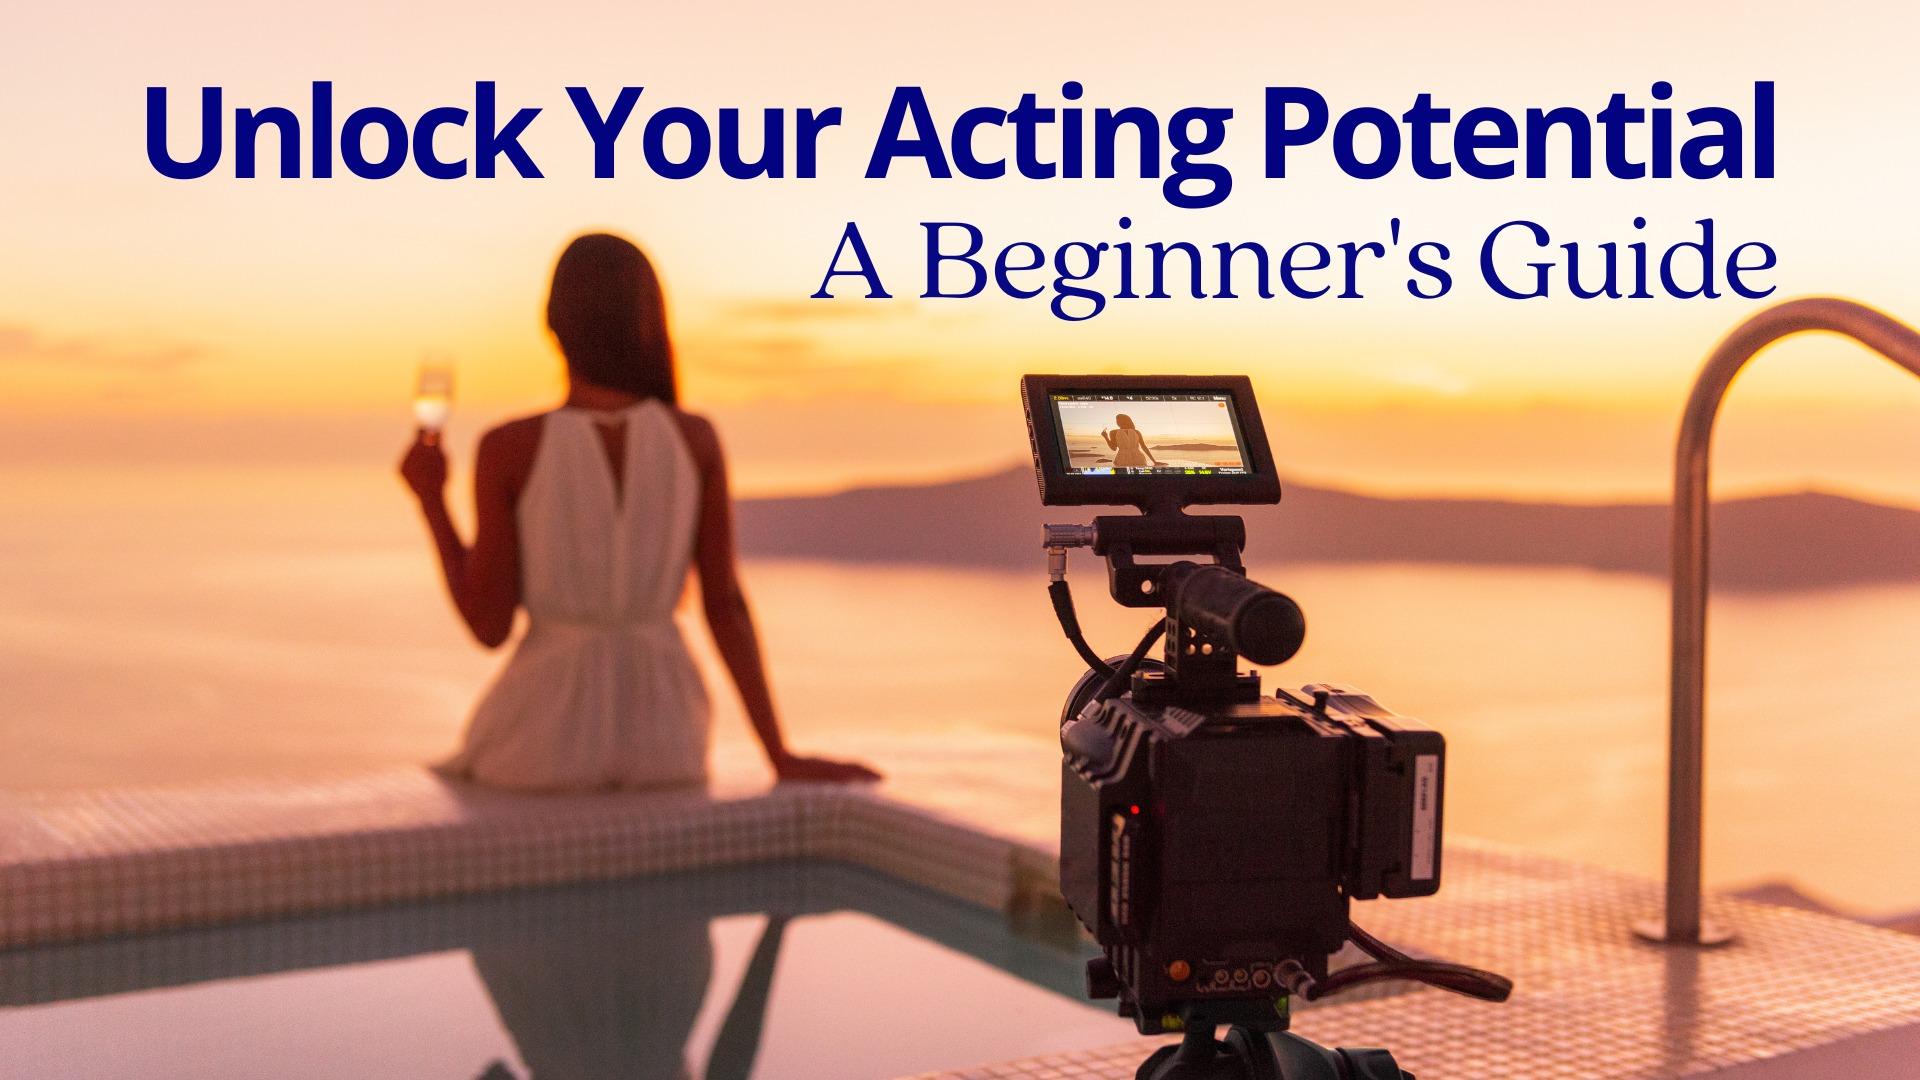 Unlock Your Acting Potential: A Beginner's Guide